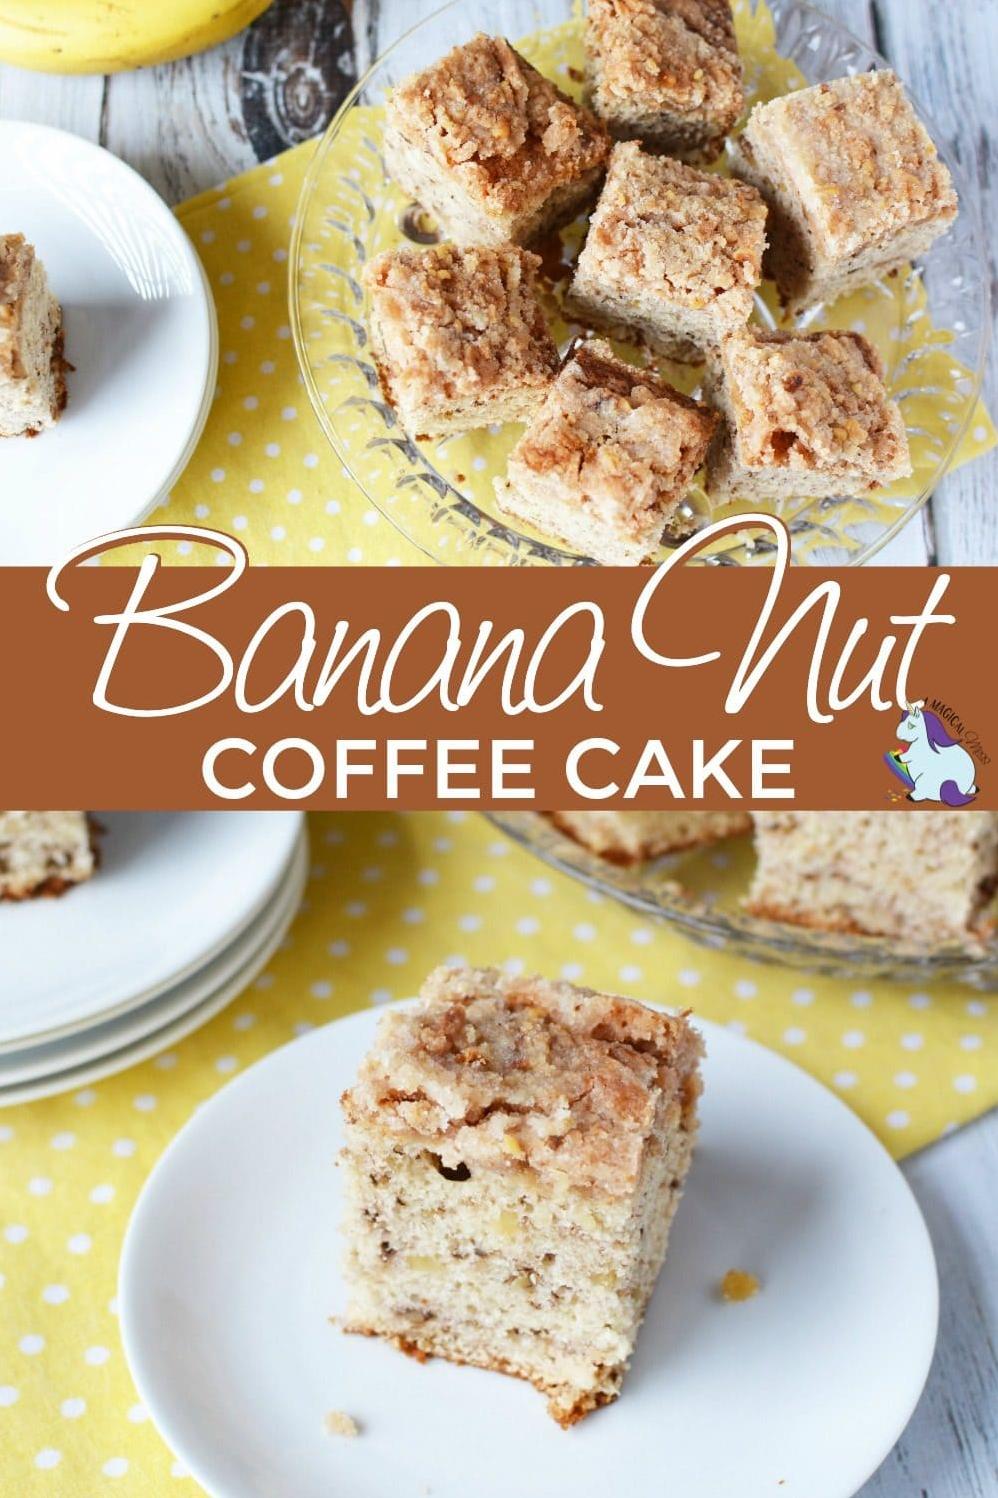  Move over, boring coffee cake; banana nut is here to steal the show.